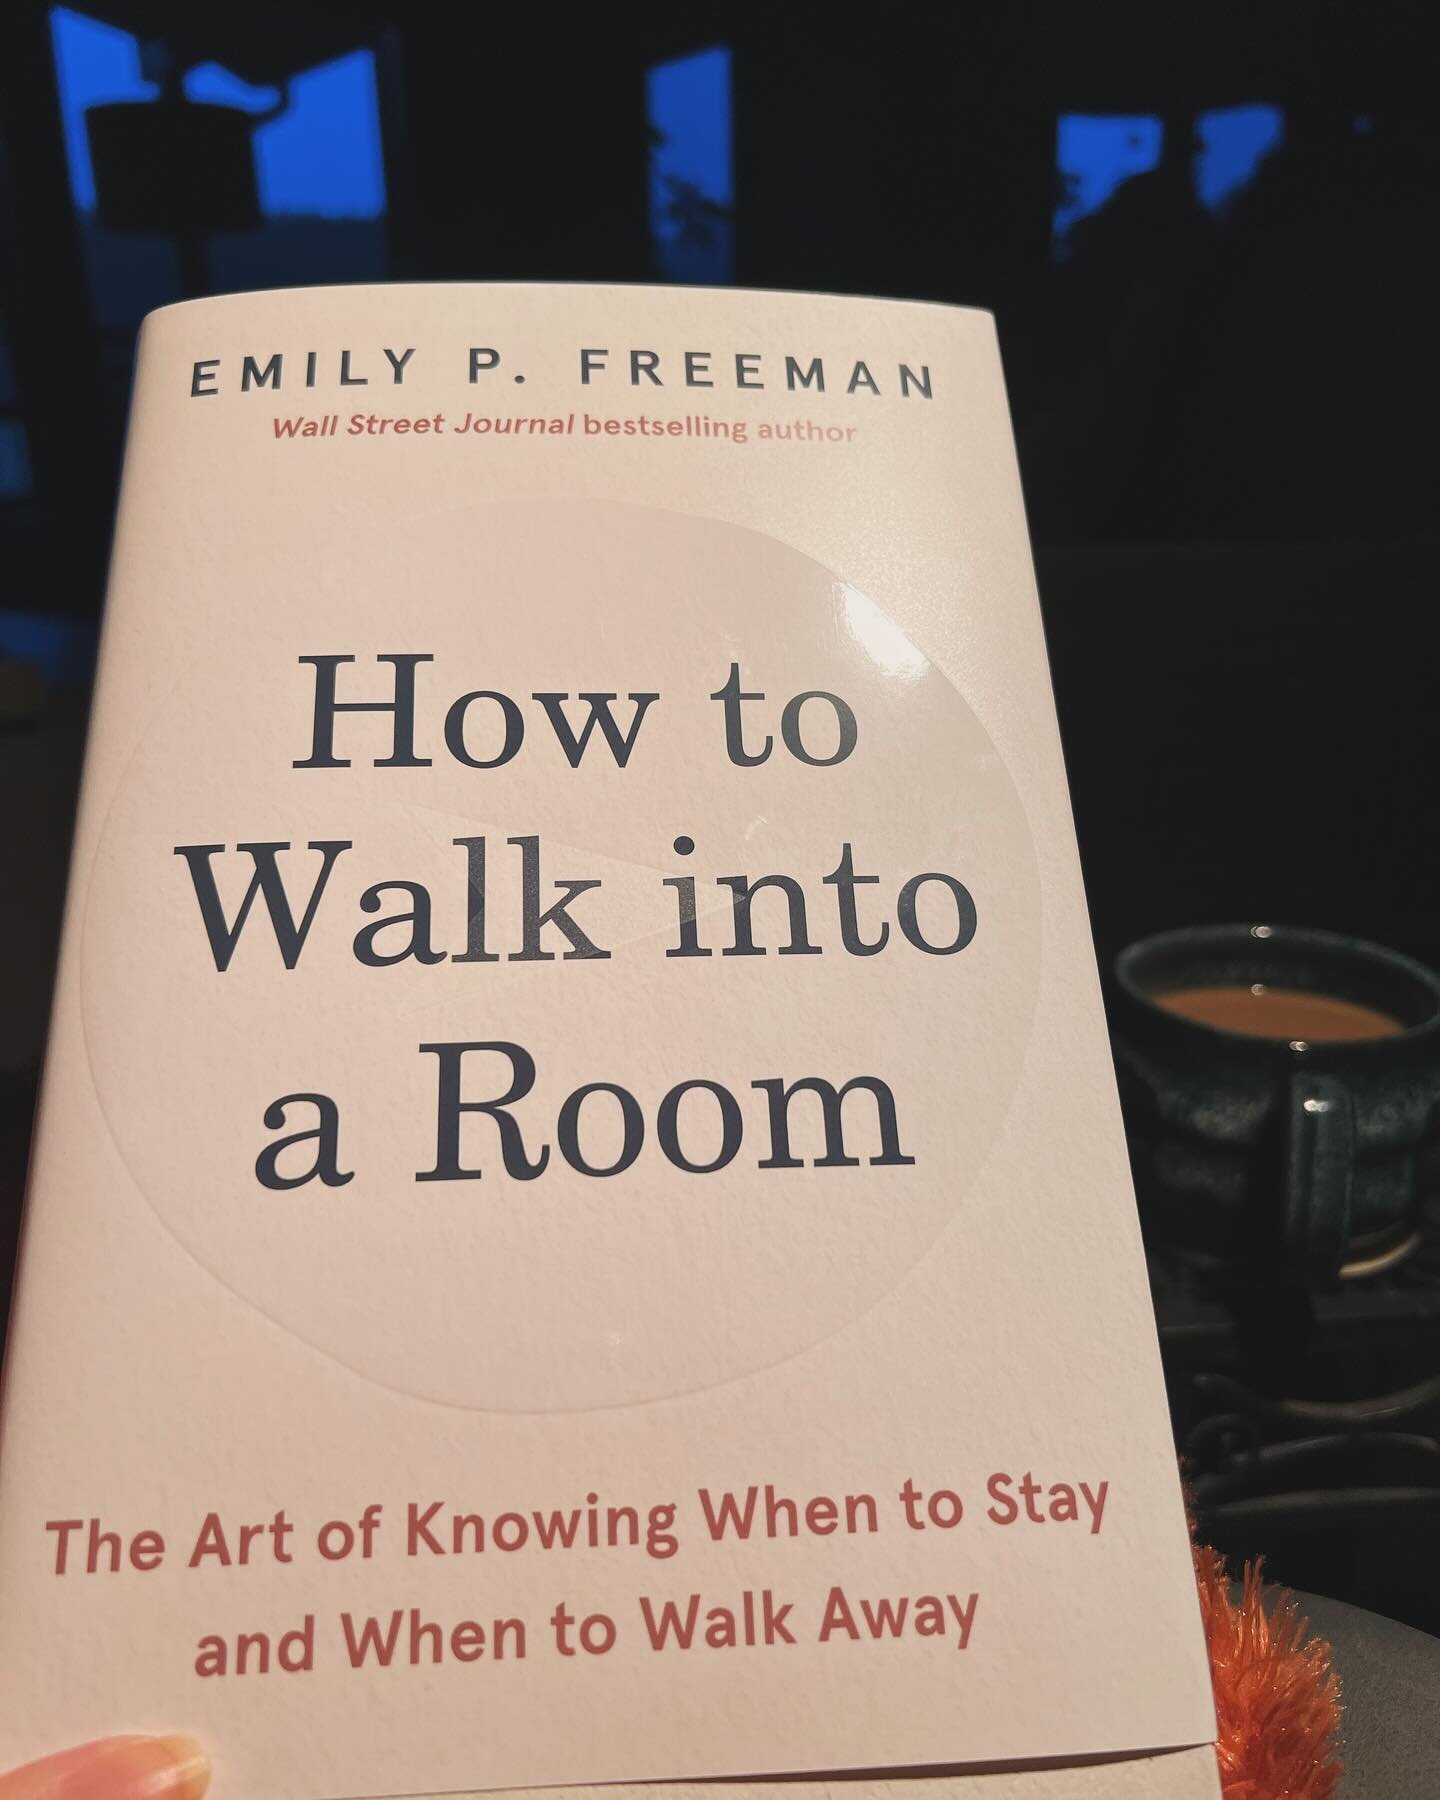 Starting my new book by Emily P Freeman.  I always anticipate with great joy, opening the pages of Emily&rsquo;s books!!📖 #howtowalkintoaroom @emilypfreeman